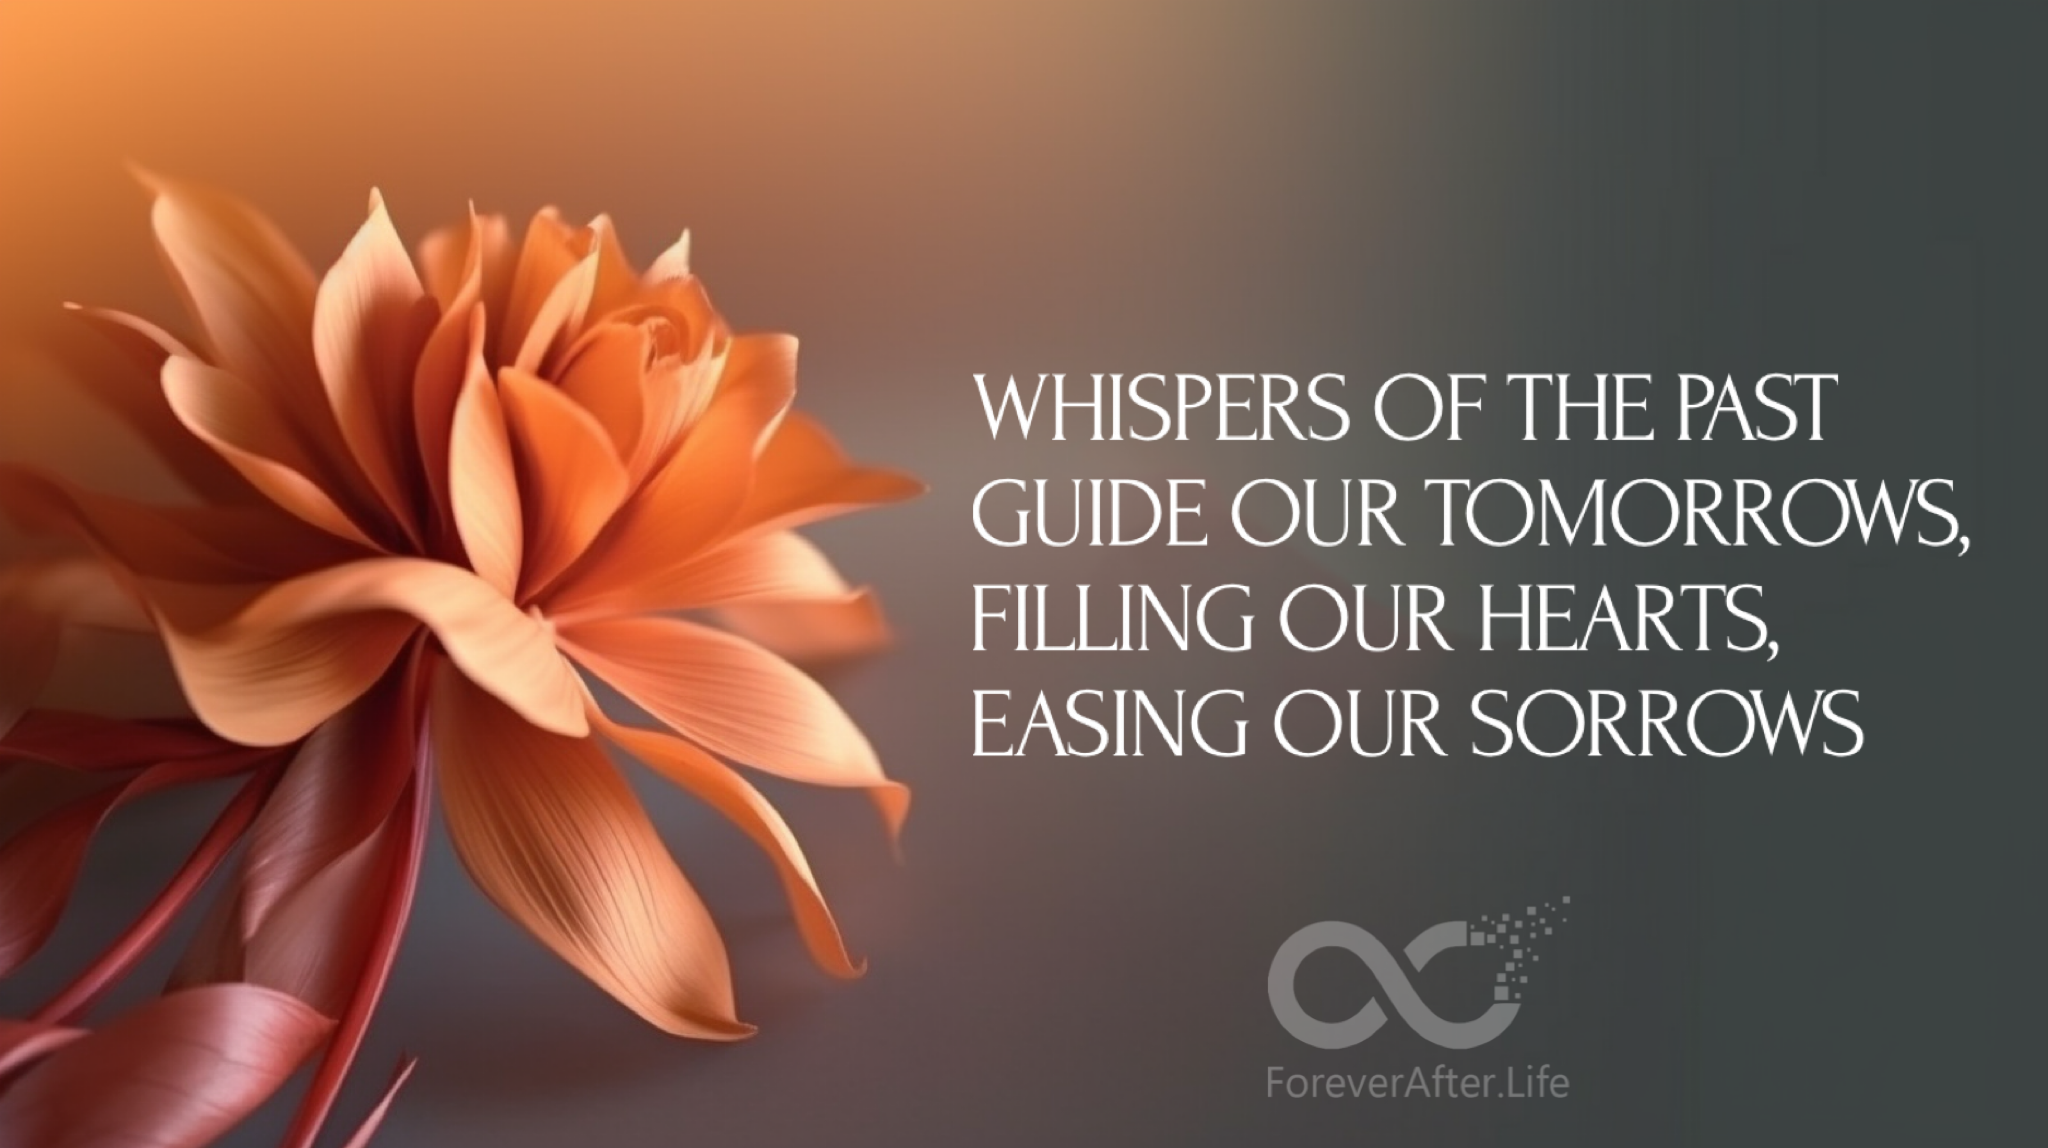 Whispers of the past guide our tomorrows, filling our hearts, easing our sorrows